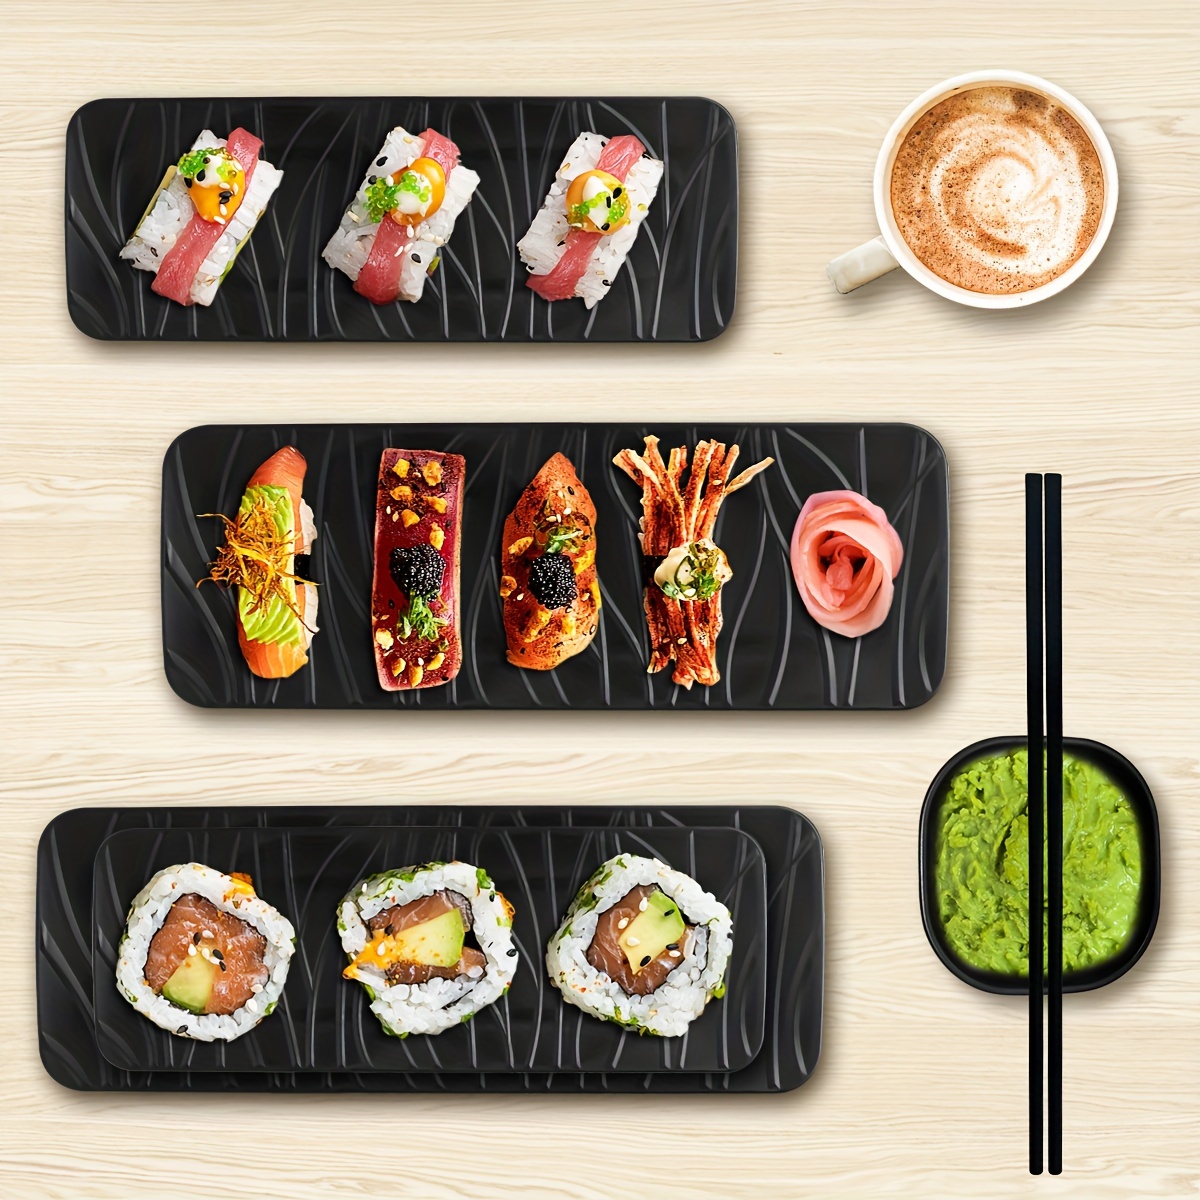 

6-piece Japanese Sushi Serving Set - Includes Plates, Dipping Bowls & Black Chopsticks For Home And Restaurant Use